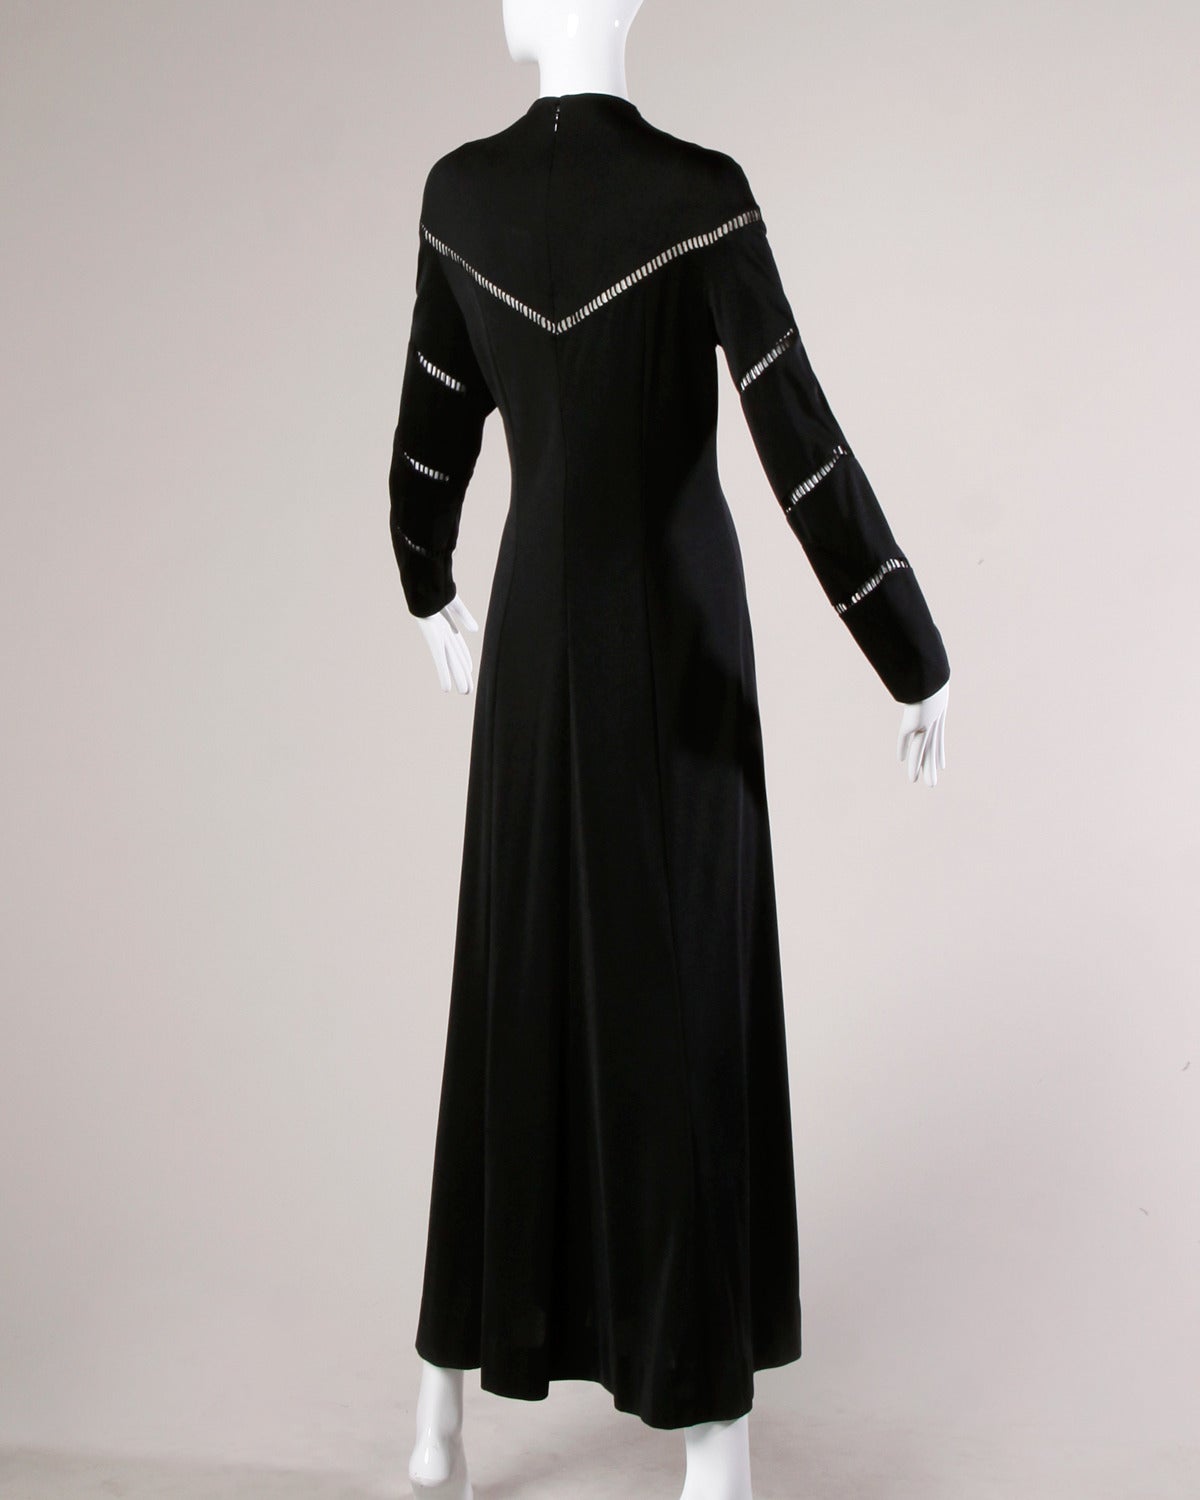 Vintage 1970s Mignon maxi dress in black jersey. Nude illusion cutout detail adds a twist to this classic dress.

Details:

Unlined
Back Zip and Hook Closure
Marked Size: Not Marked
Estimated Size: M-L
Color: Nude/ Black
Fabric: Jersey